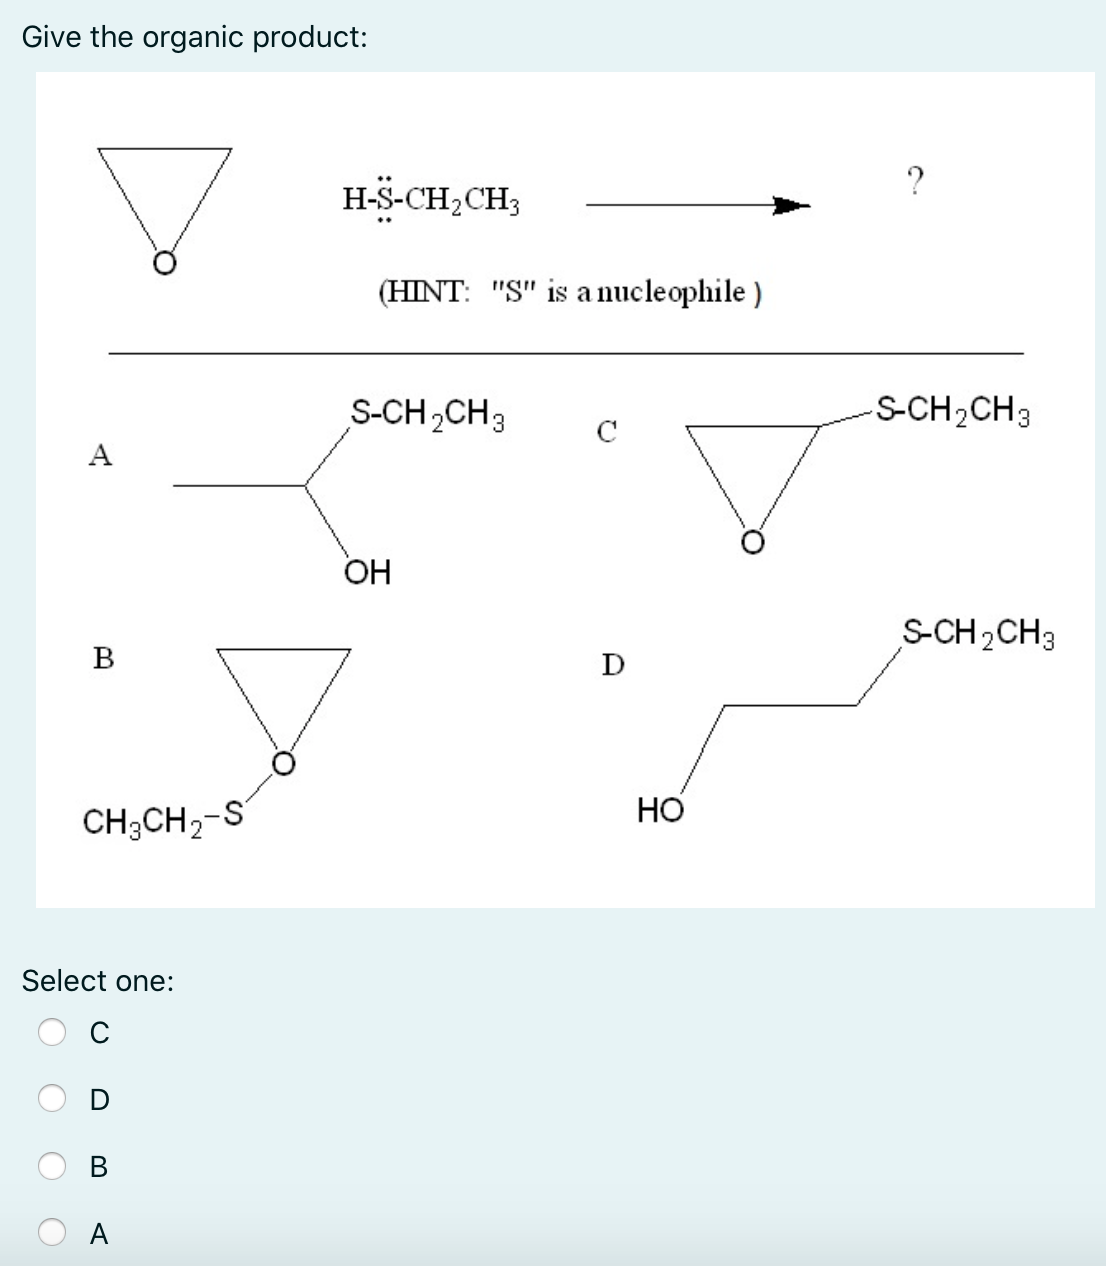 Give the organic product:
H-S-CH,CH3
(HINT: "S" is a nucleophile )
S-CH,CH3
-S-CH2CH3
A
ОН
S-CH2CH3
B
D
НО
CH3CH2-S
Select one:
В
A
